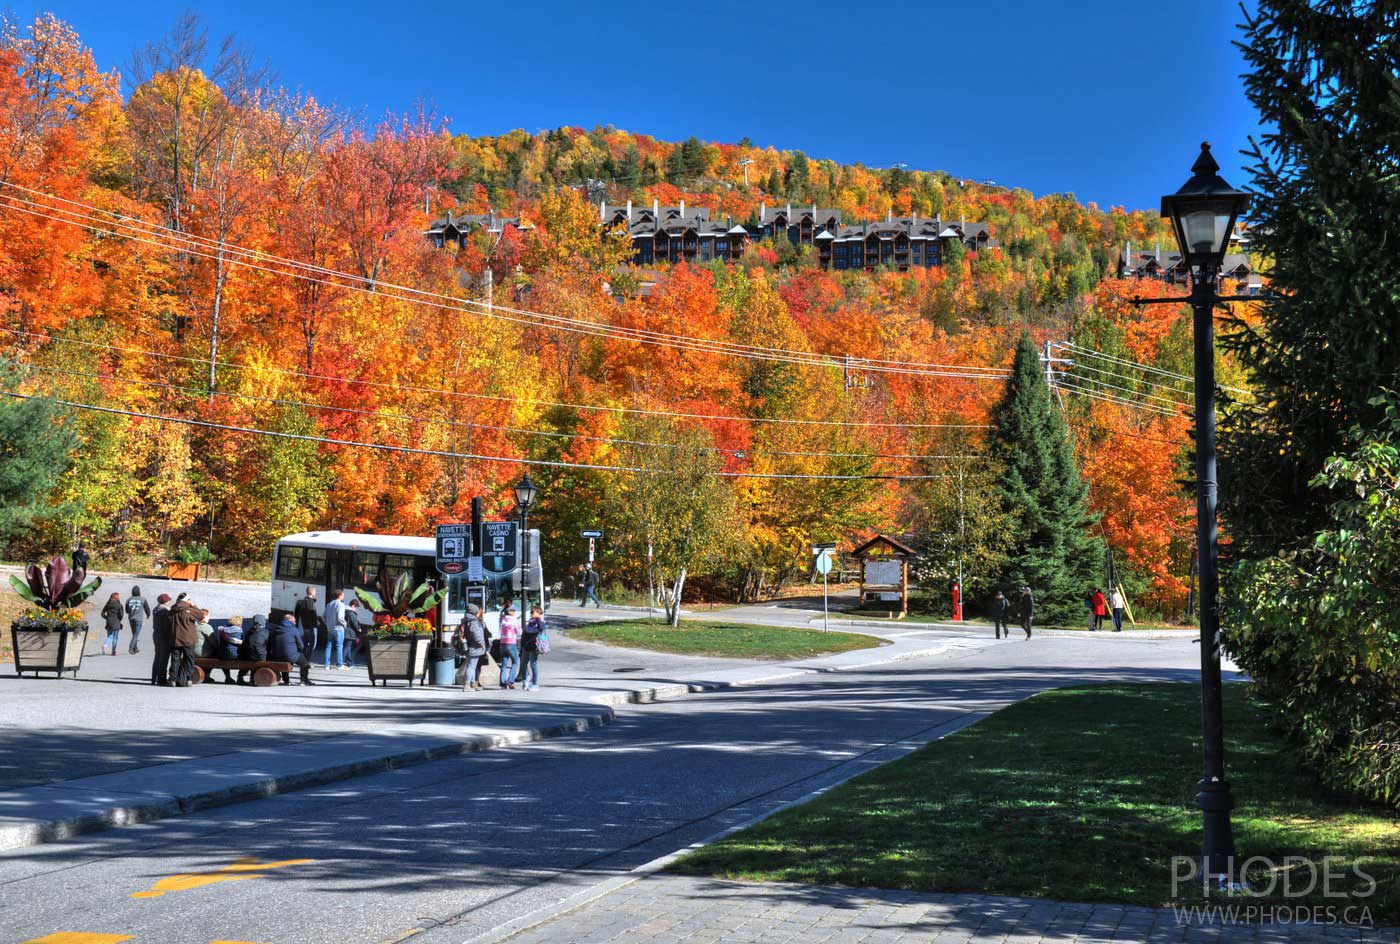 City of Mont-Tremblant near visitor center